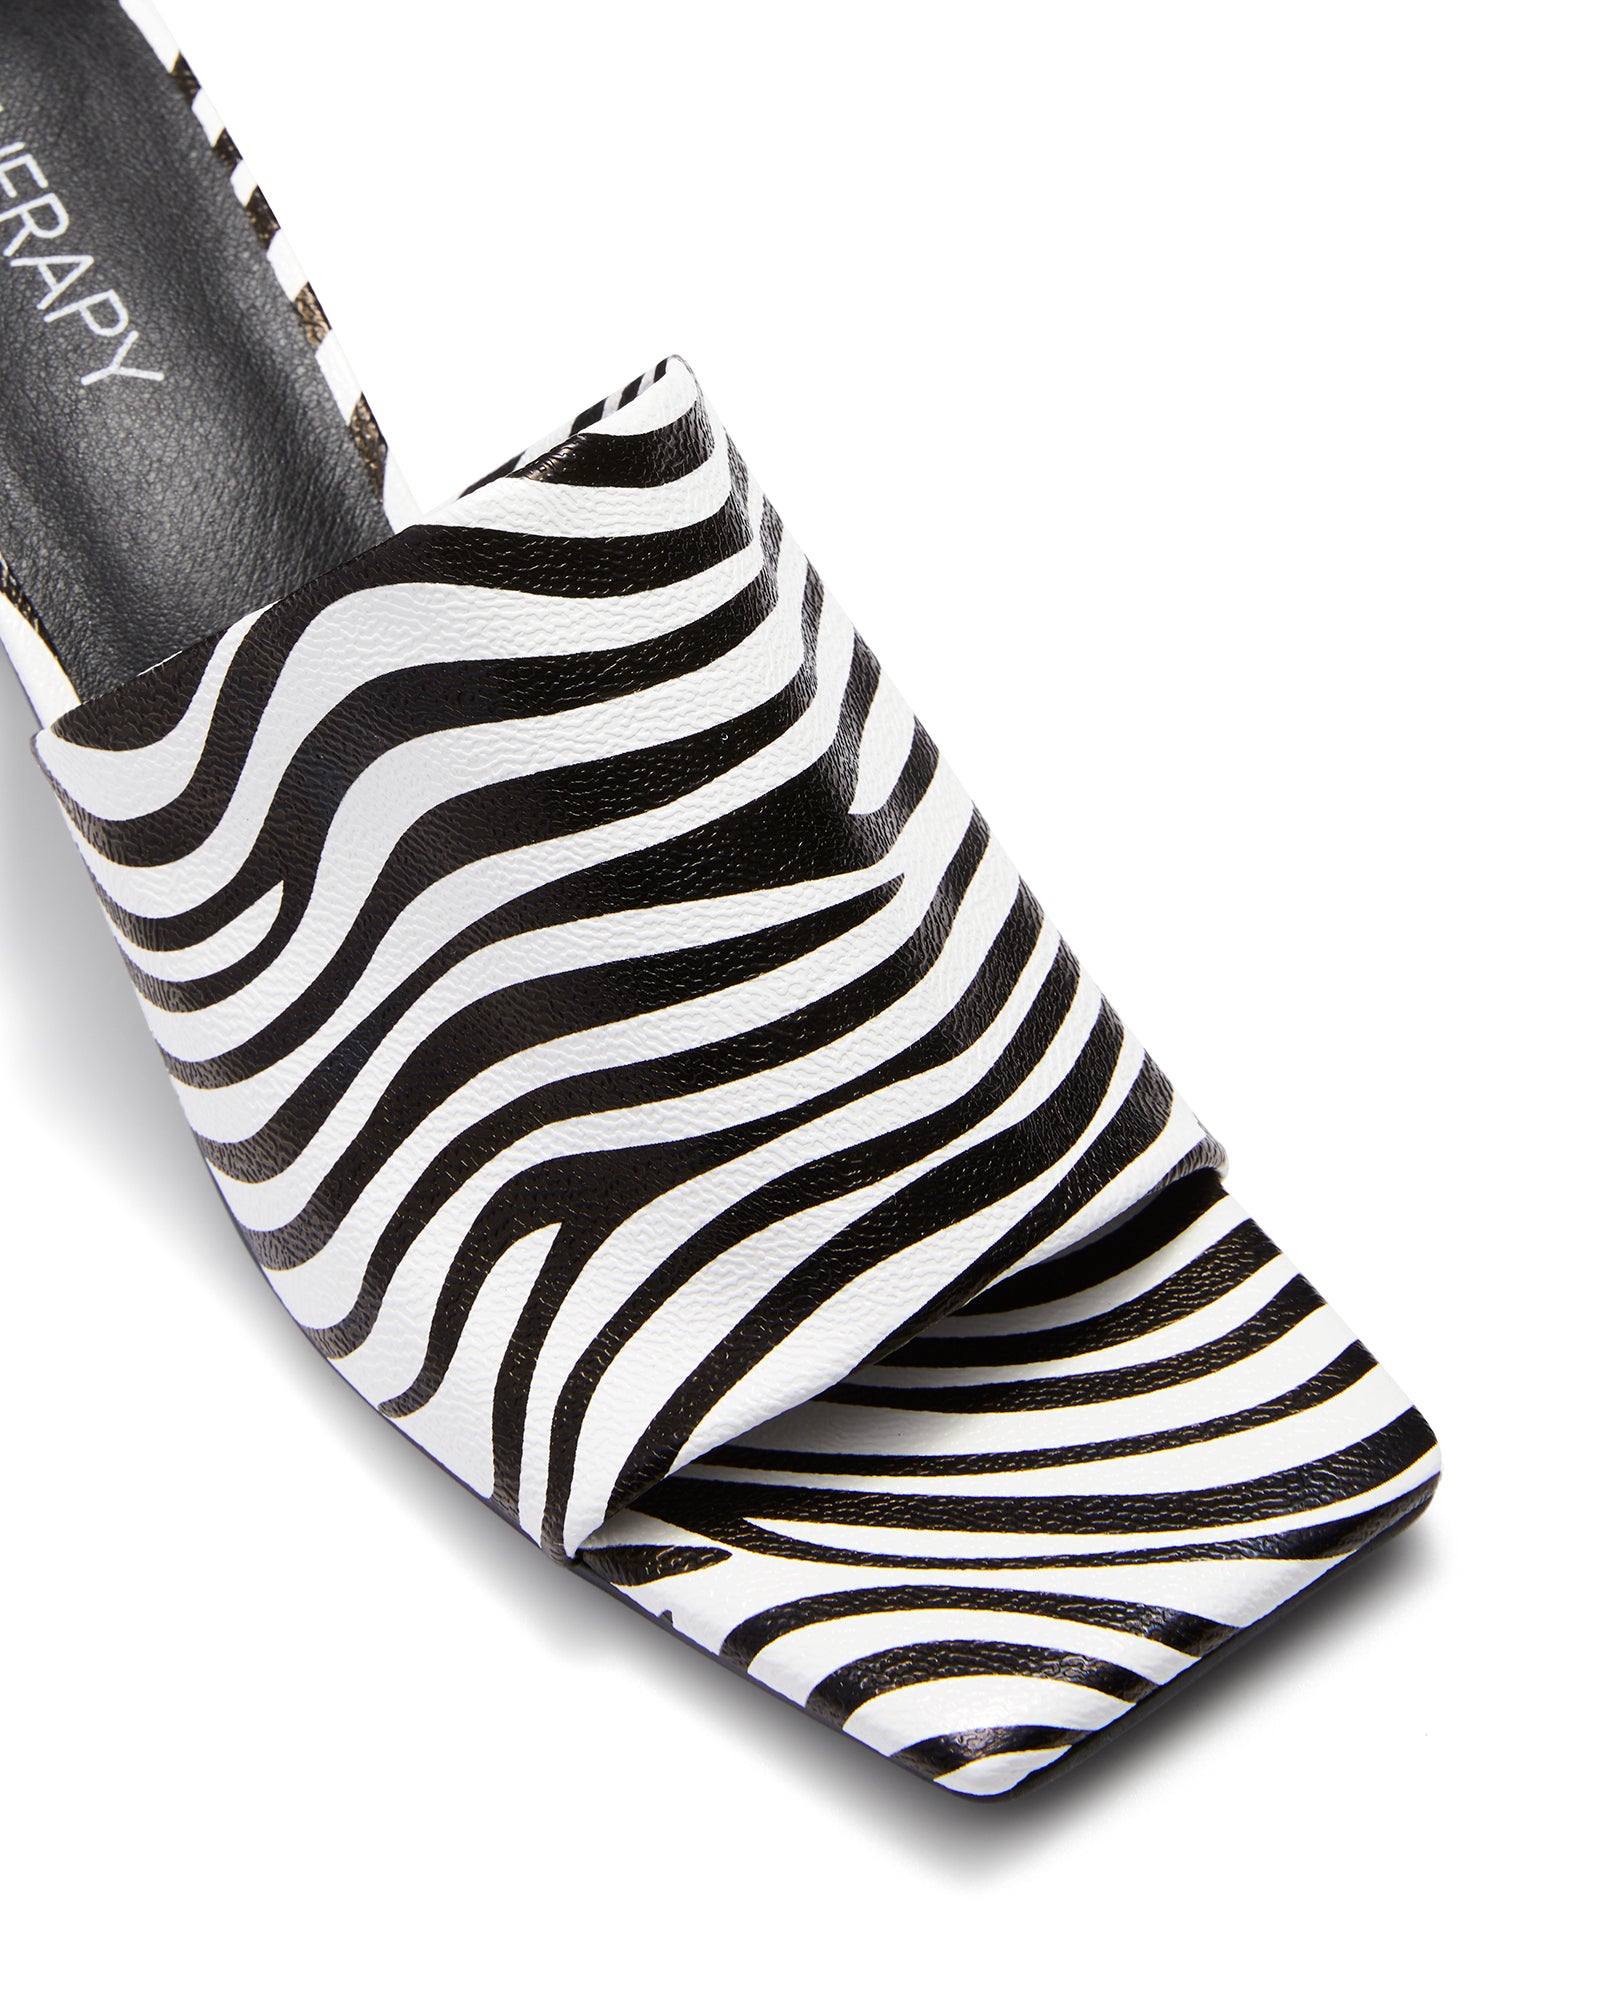 Therapy Shoes Grimes Zebra | Women's Heels | Sandals | Mules | Square Toe